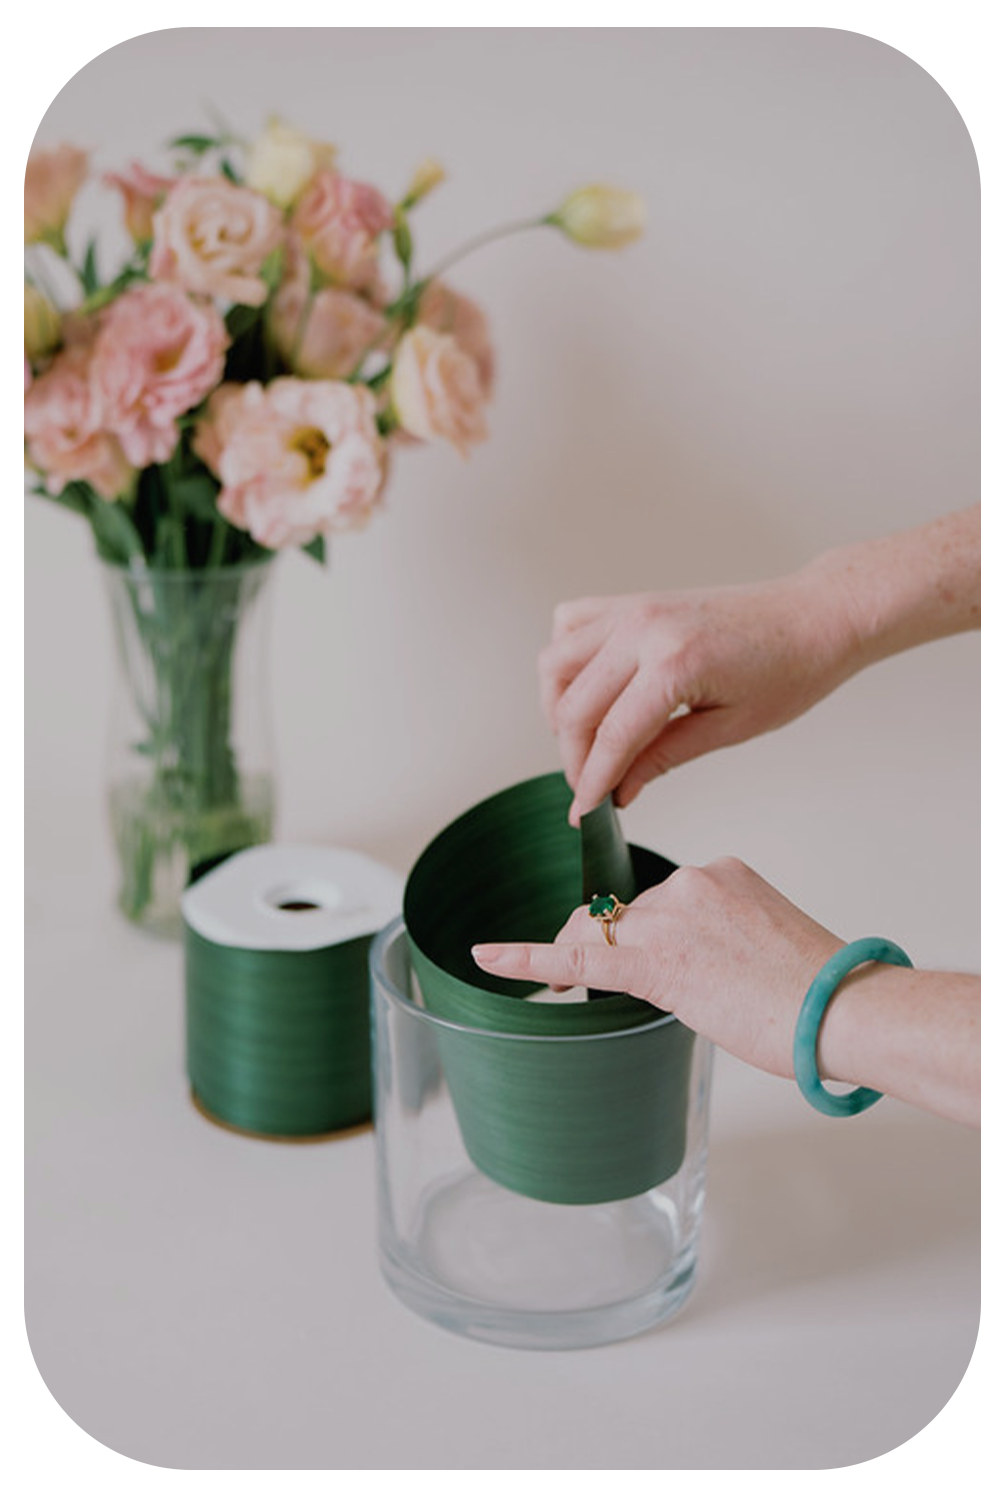 Bloom Room .5 x 180' Green Waterproof Floral Tape - Floral Wire & Wraps - Floral Craft Supplies & Materials